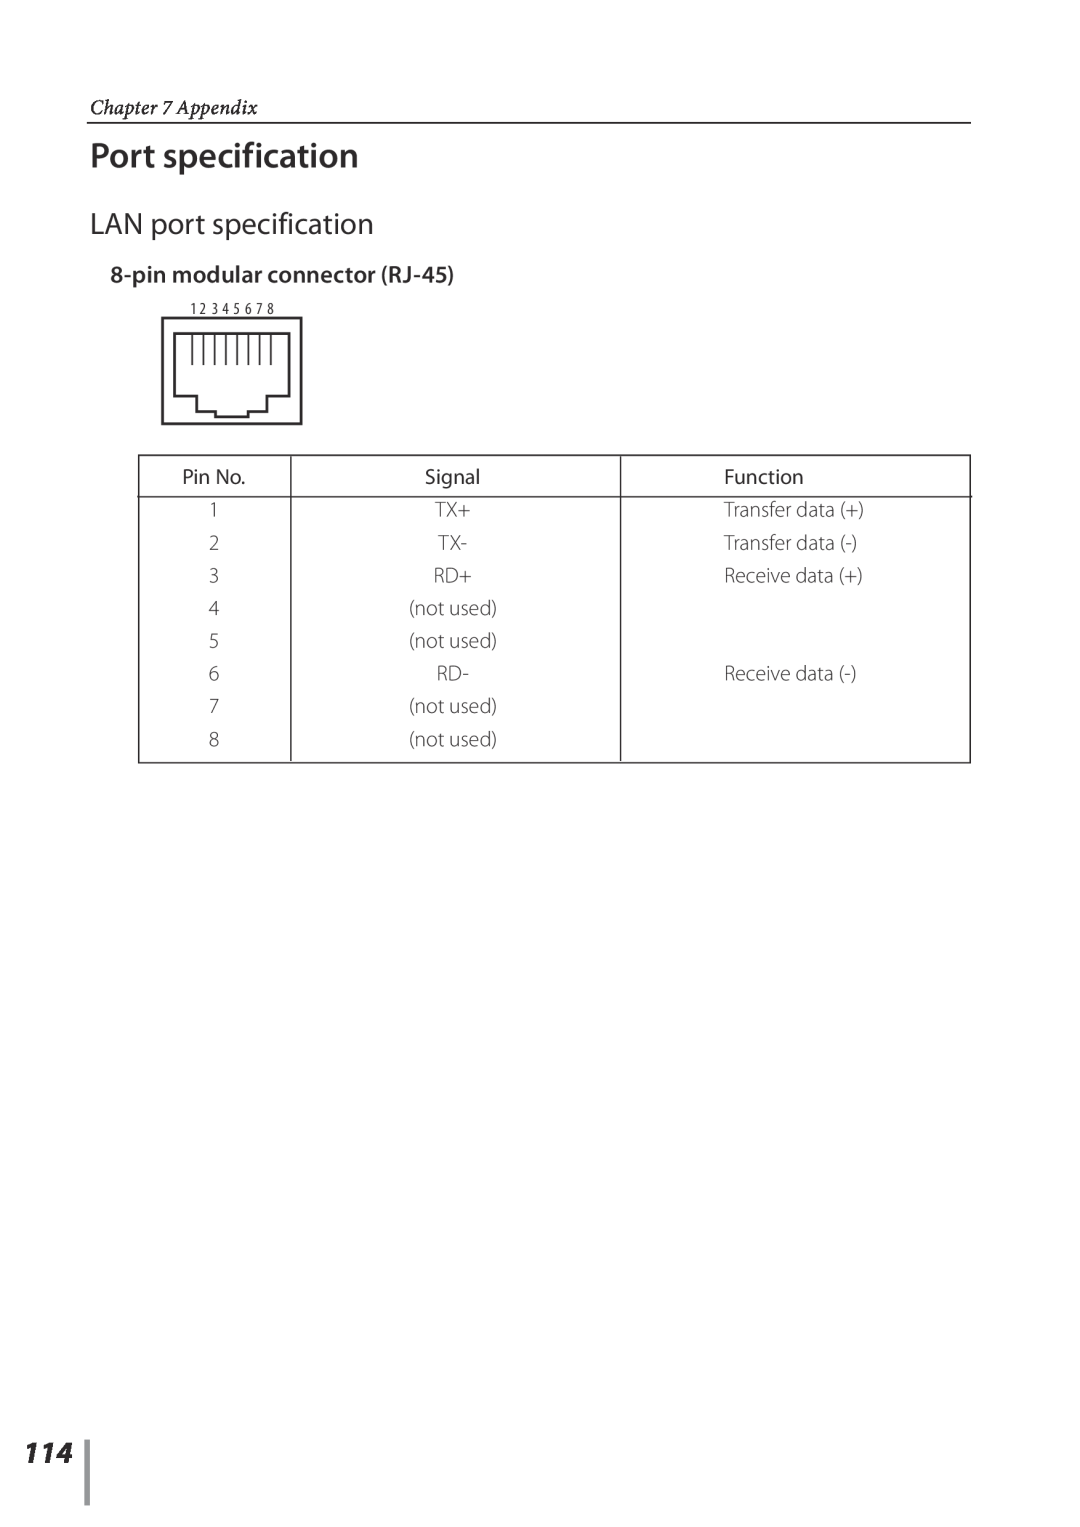 Sanyo POA-PN03C owner manual Port specification, LAN port specification, pinmodular connector RJ-45, Appendix 